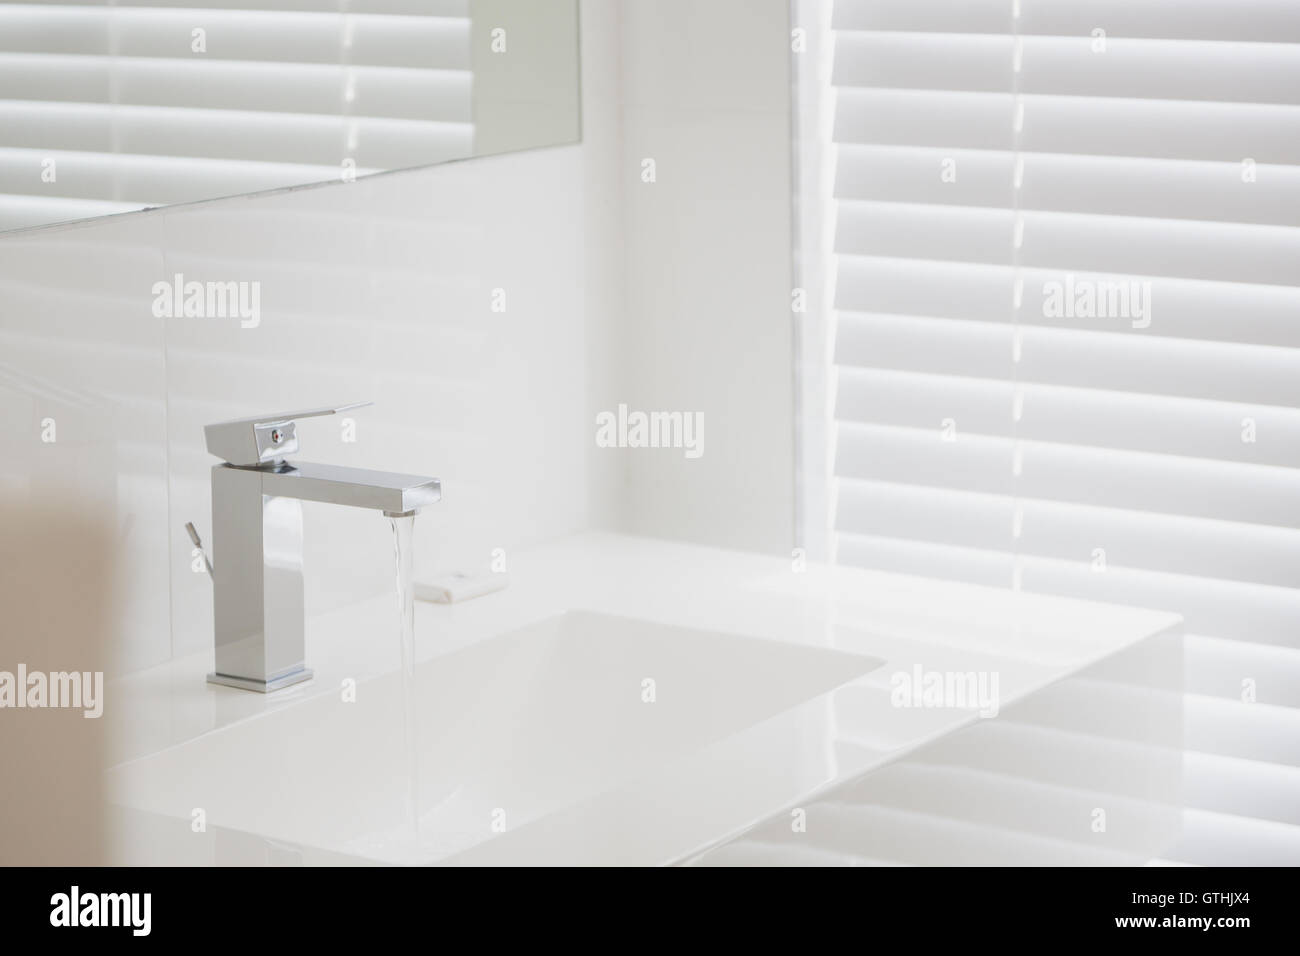 Modern white bathroom sink and faucet in home showcase interior Stock Photo